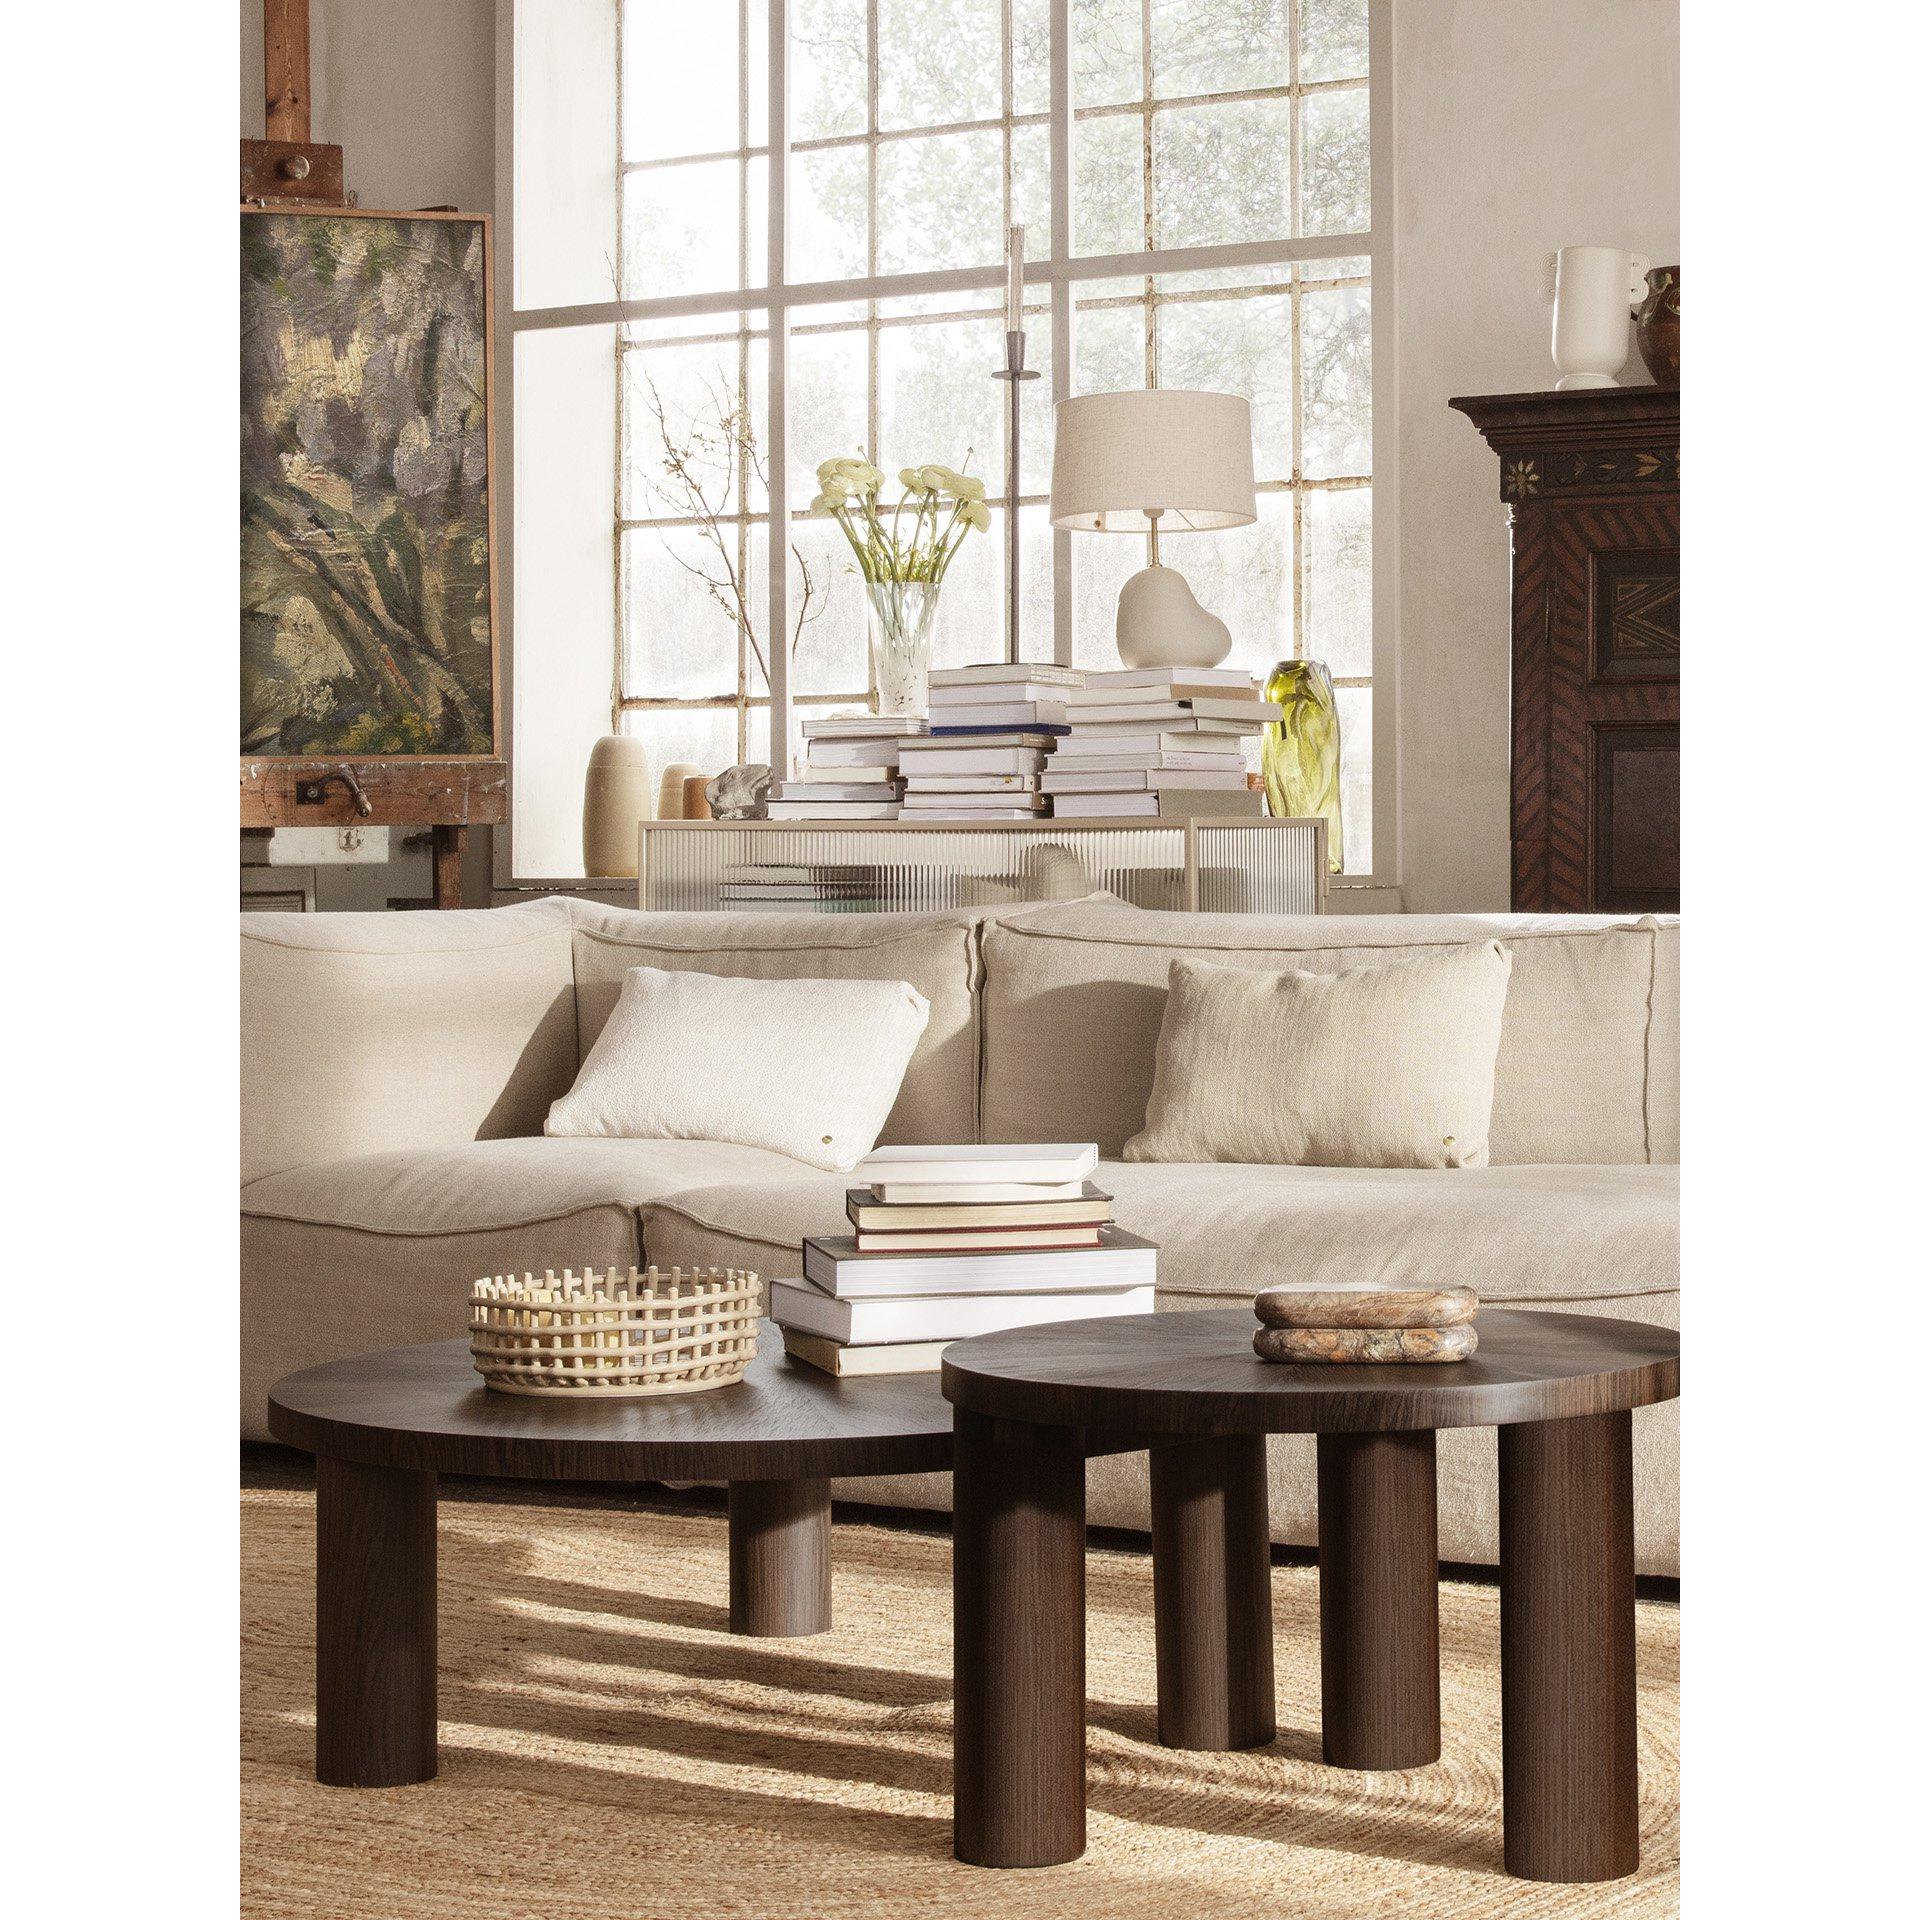 Ferm Living Post Coffee Table Smoked Oak Large, Lines